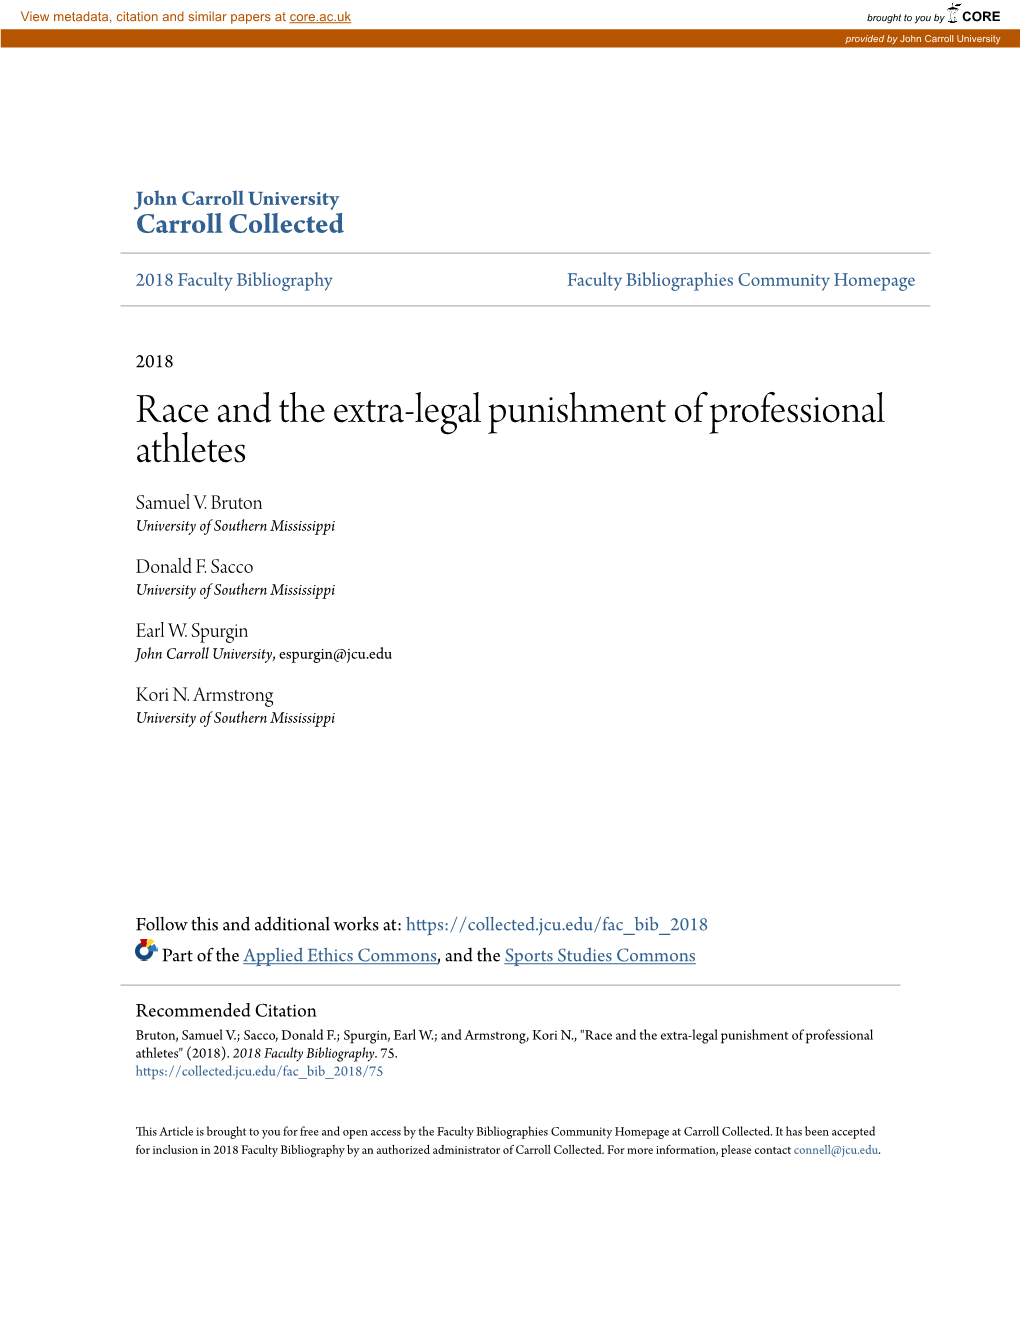 Race and the Extra-Legal Punishment of Professional Athletes Samuel V